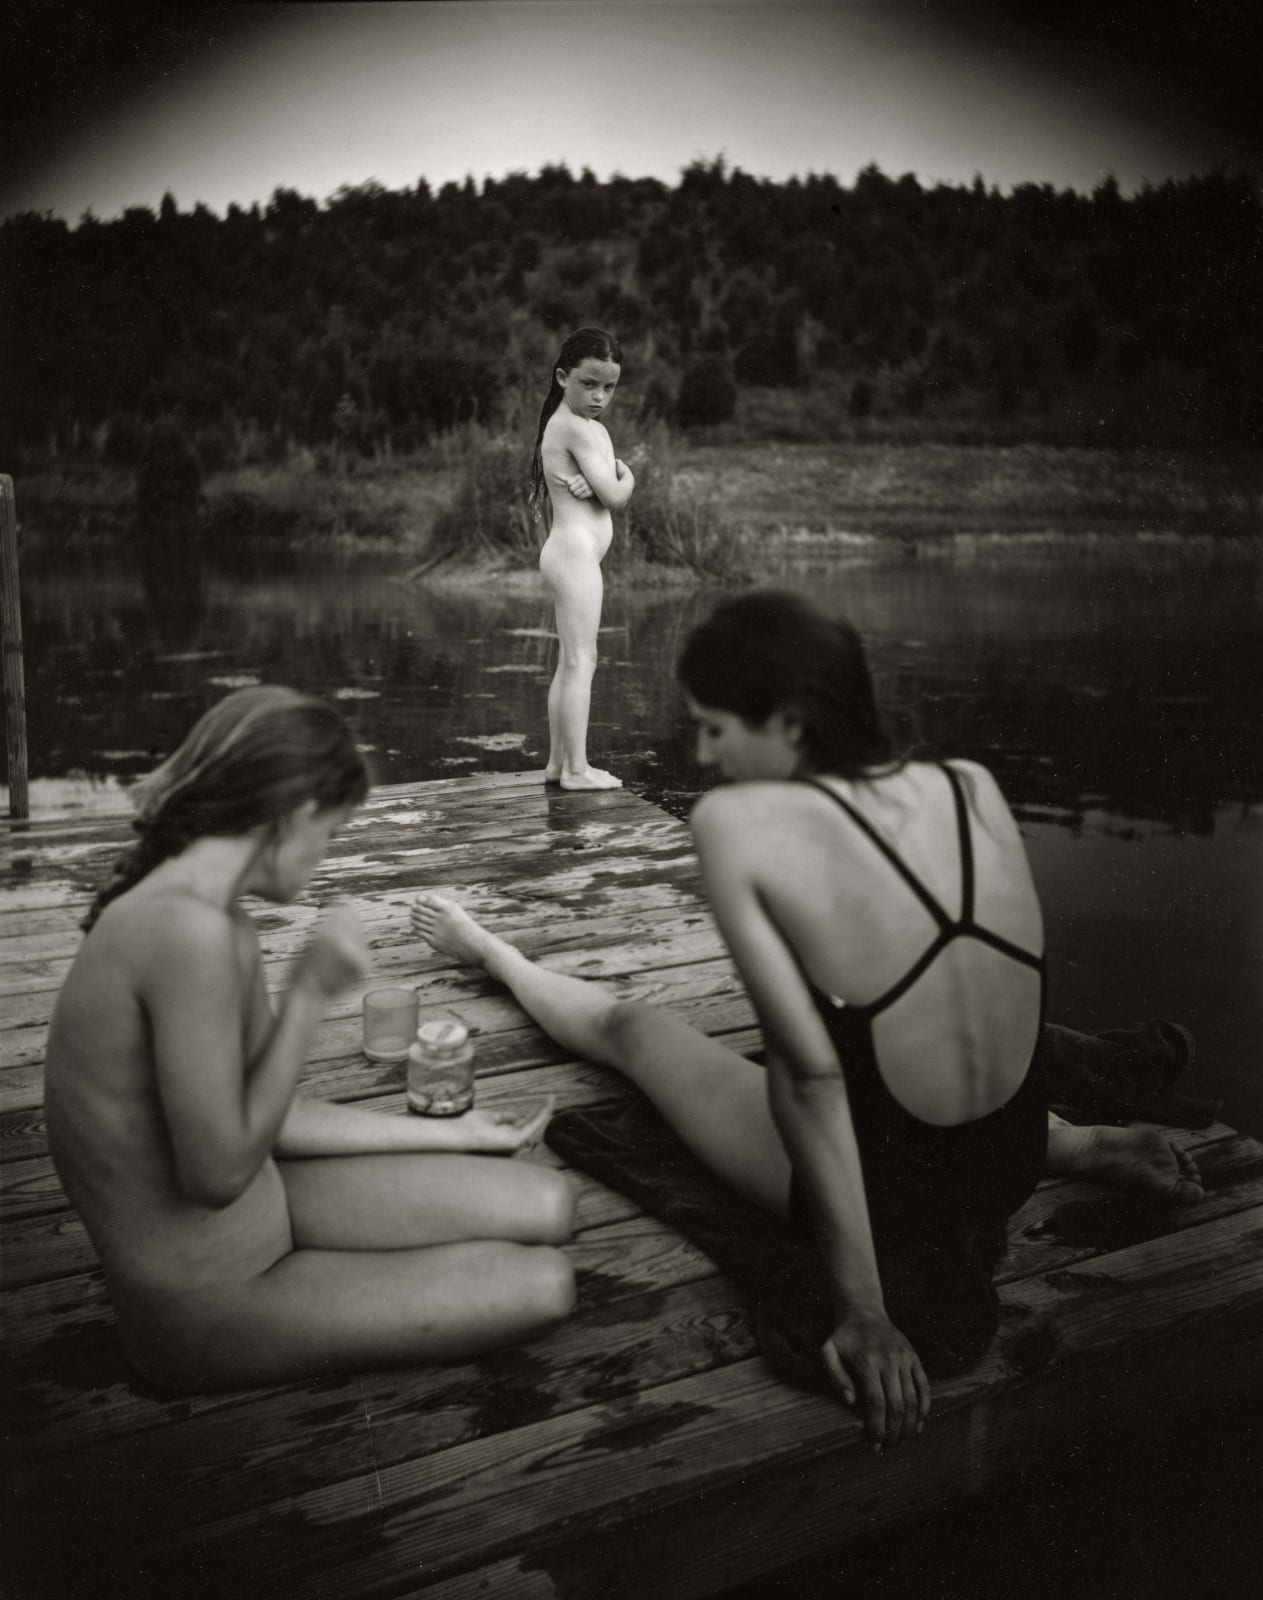 Virginia at the end of the dock looking at the big girls jealously, from the Immediate Family series by Sally Mann